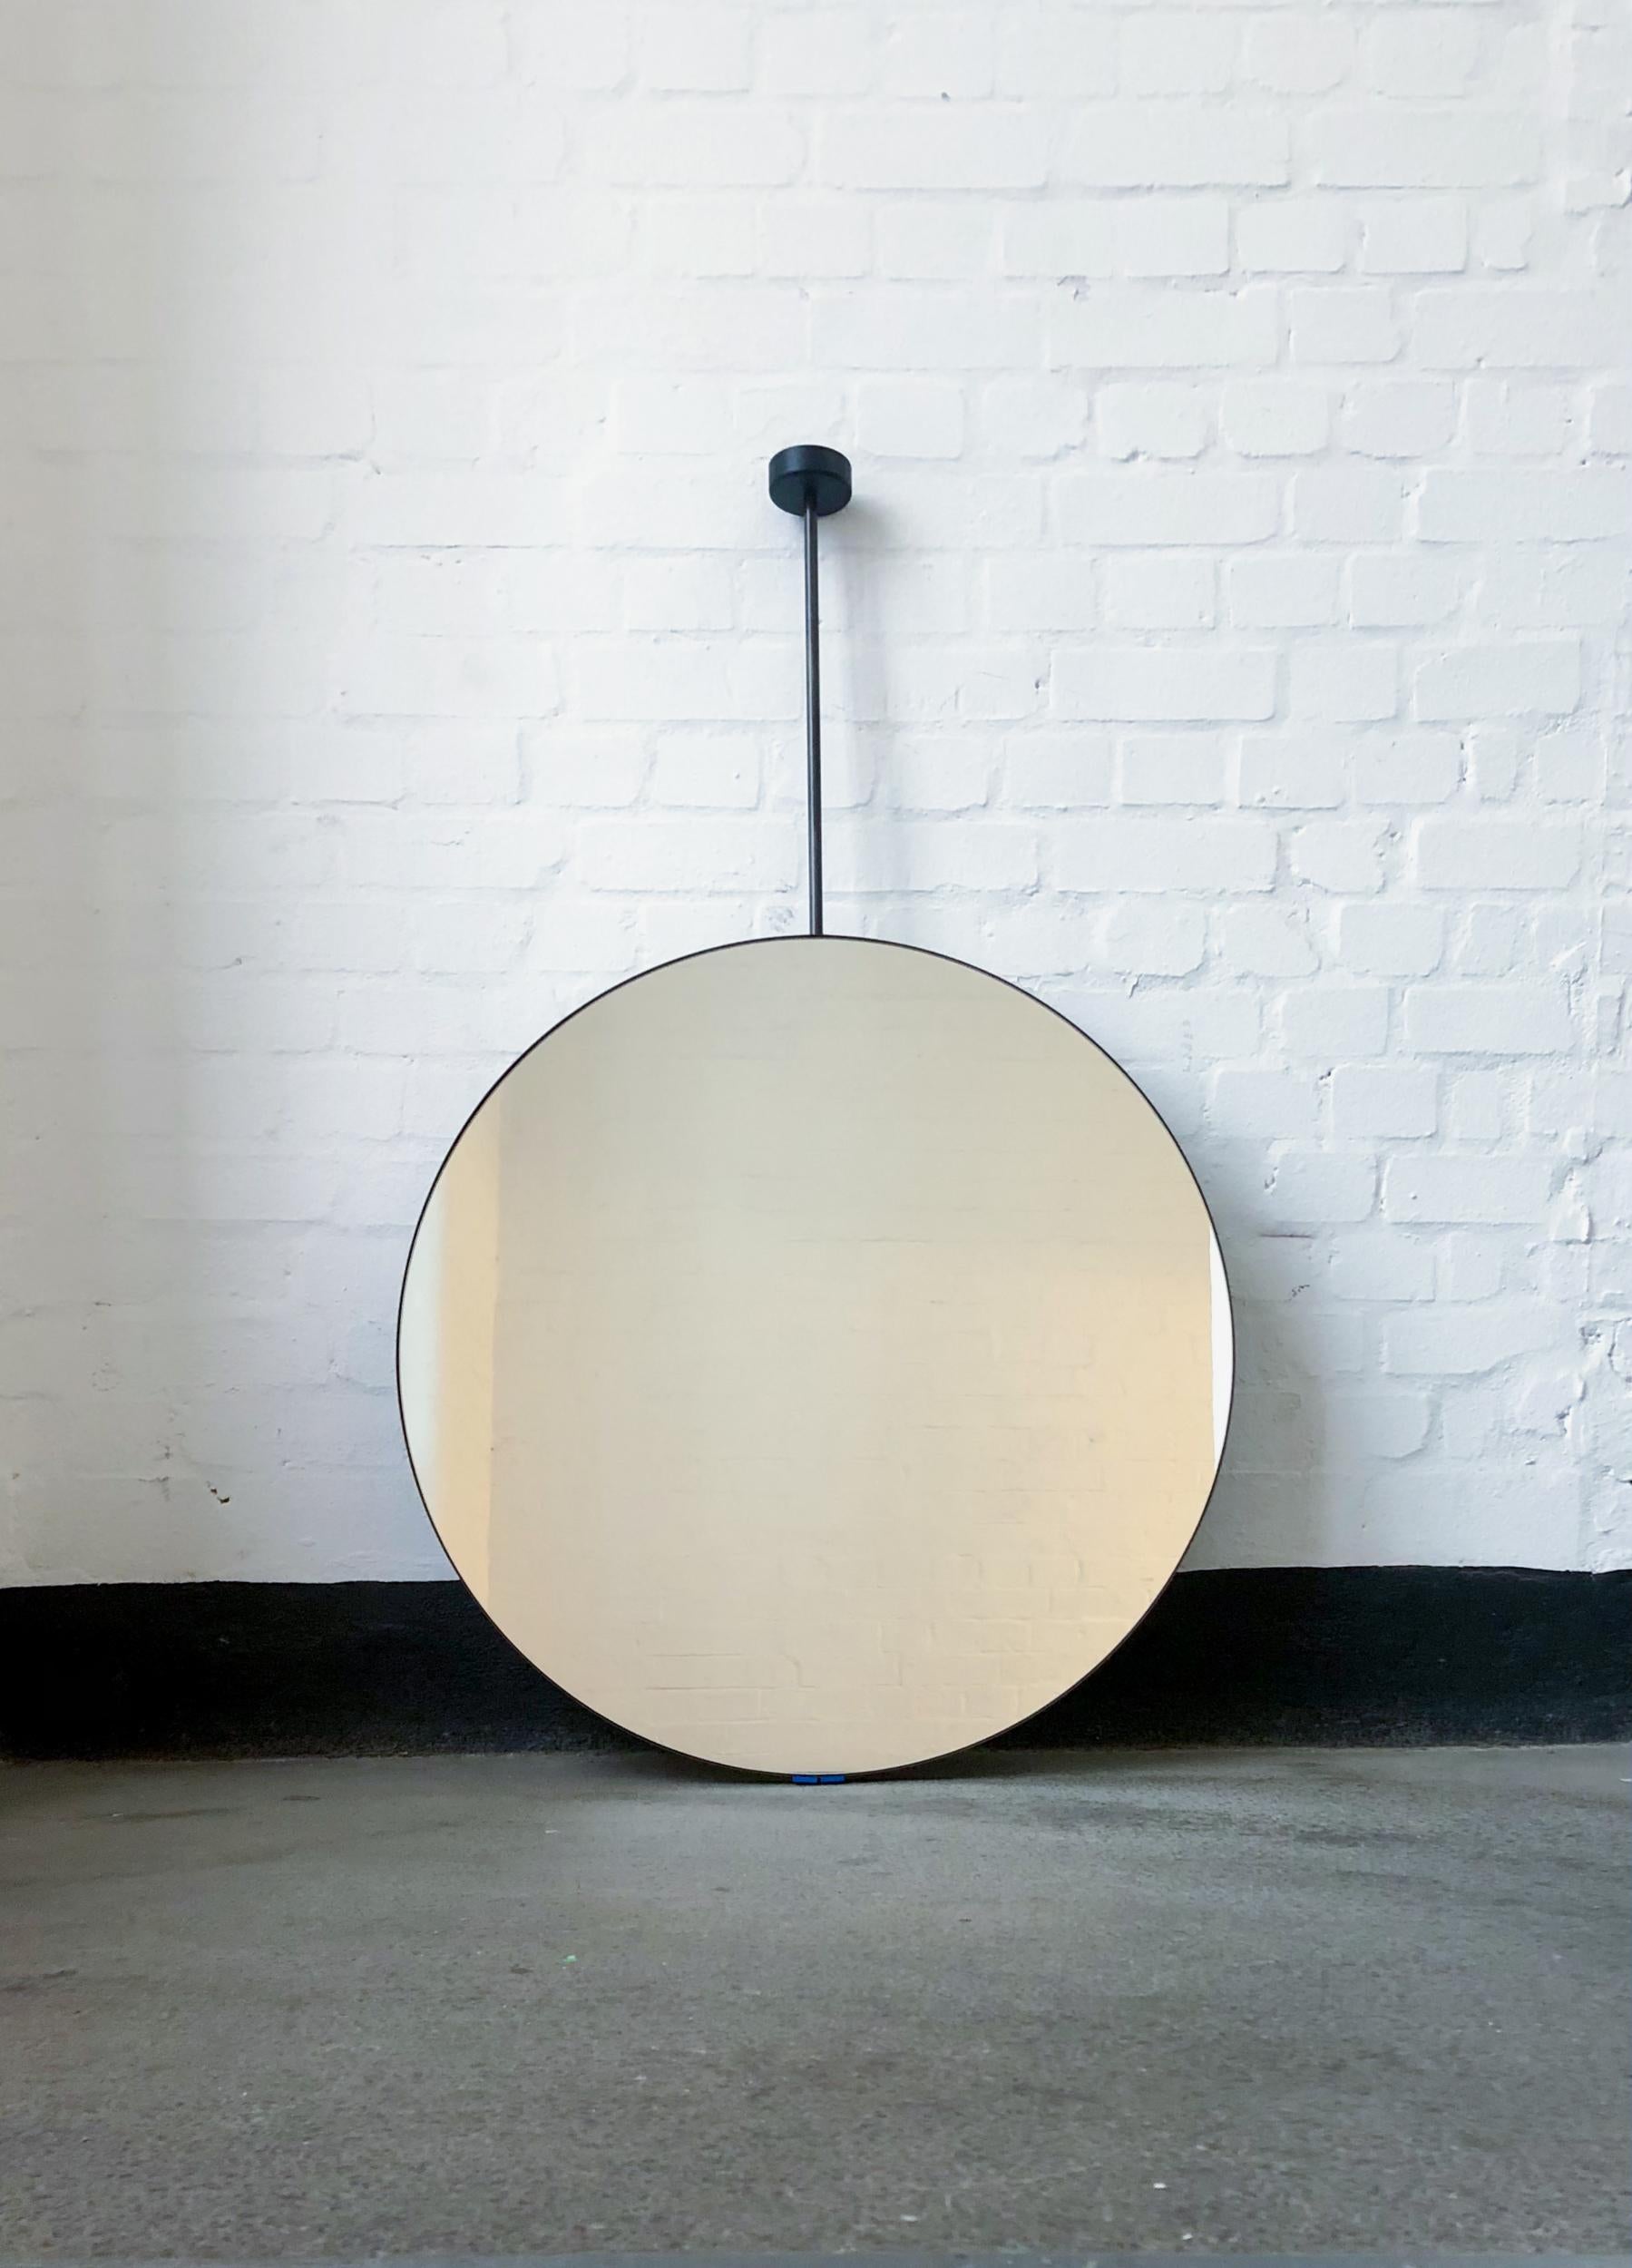 Charming ceiling suspended round mirror with a blackened stainless steel frame.

650mm (25.6